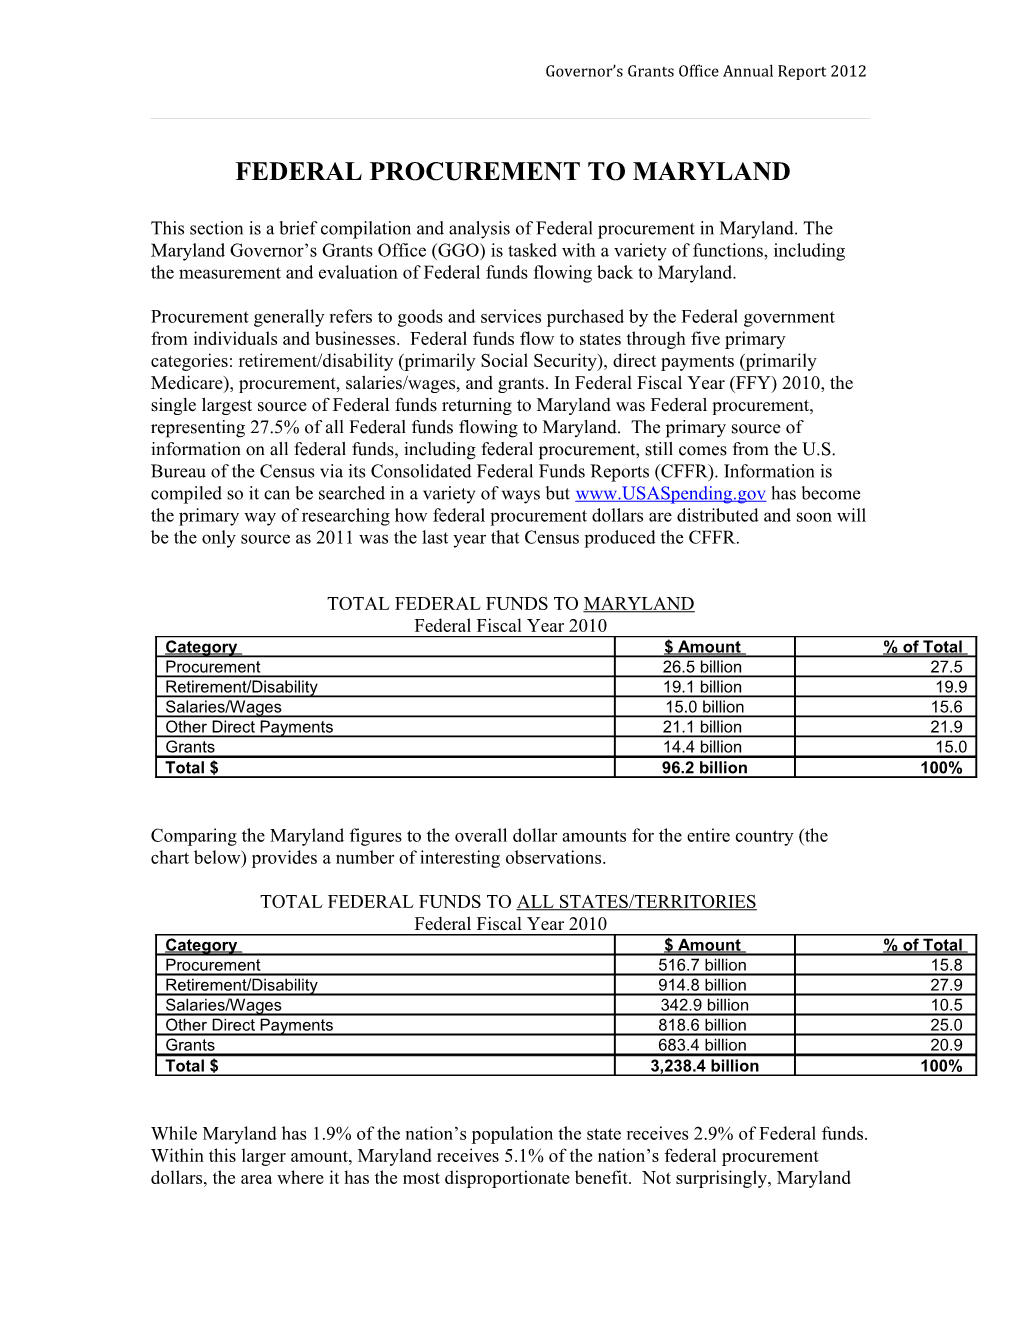 Federal Procurement to Maryland